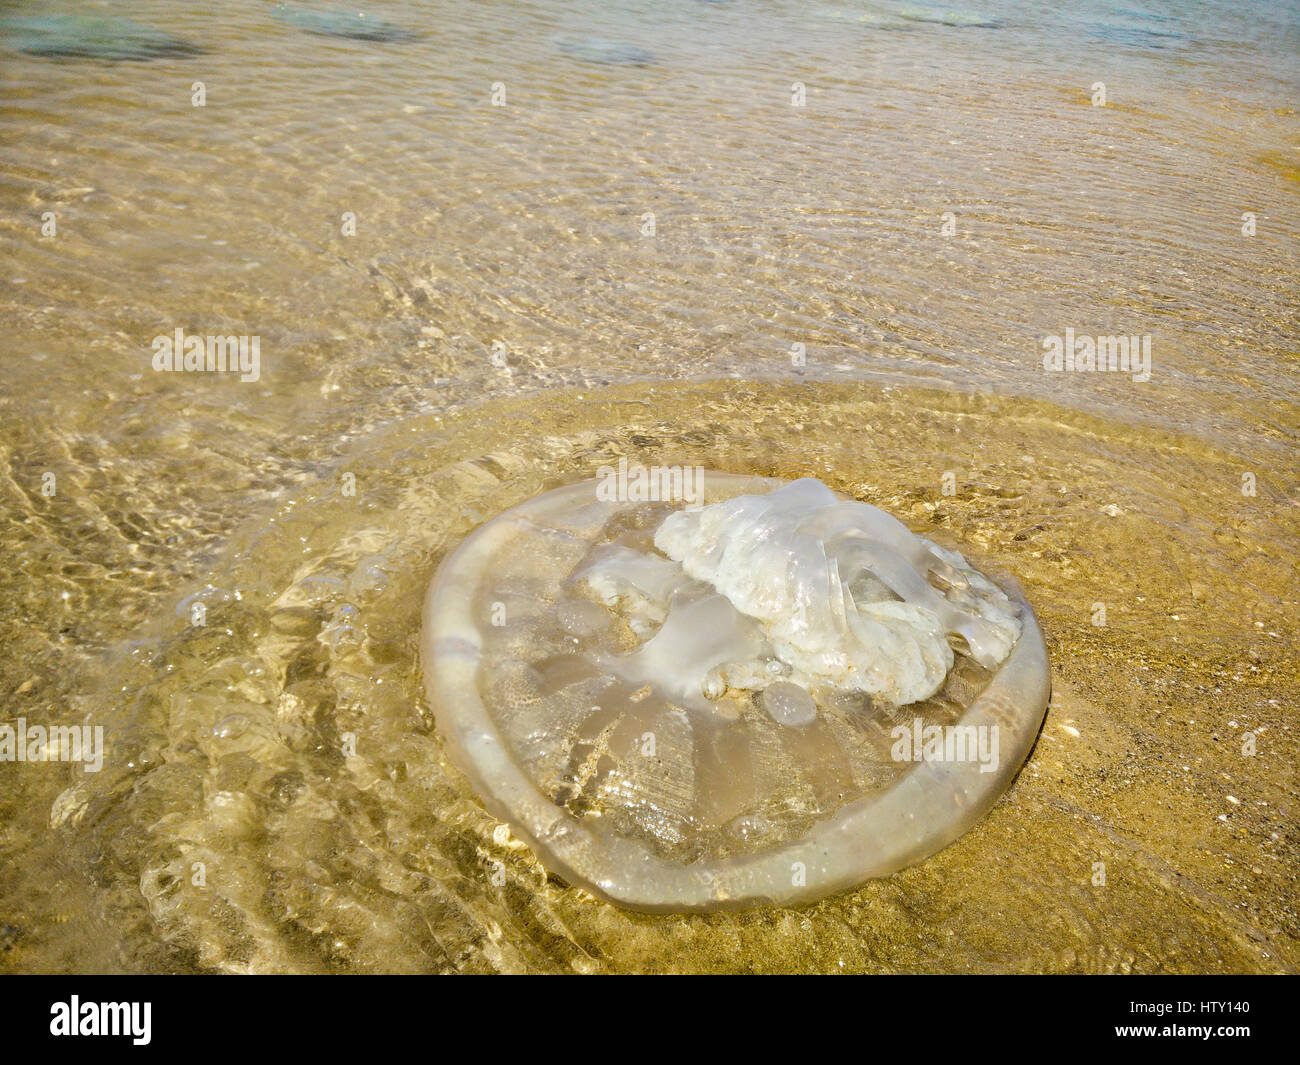 Jellyfish washed onto the beach. Photographed in Haifa, Israel Stock Photo